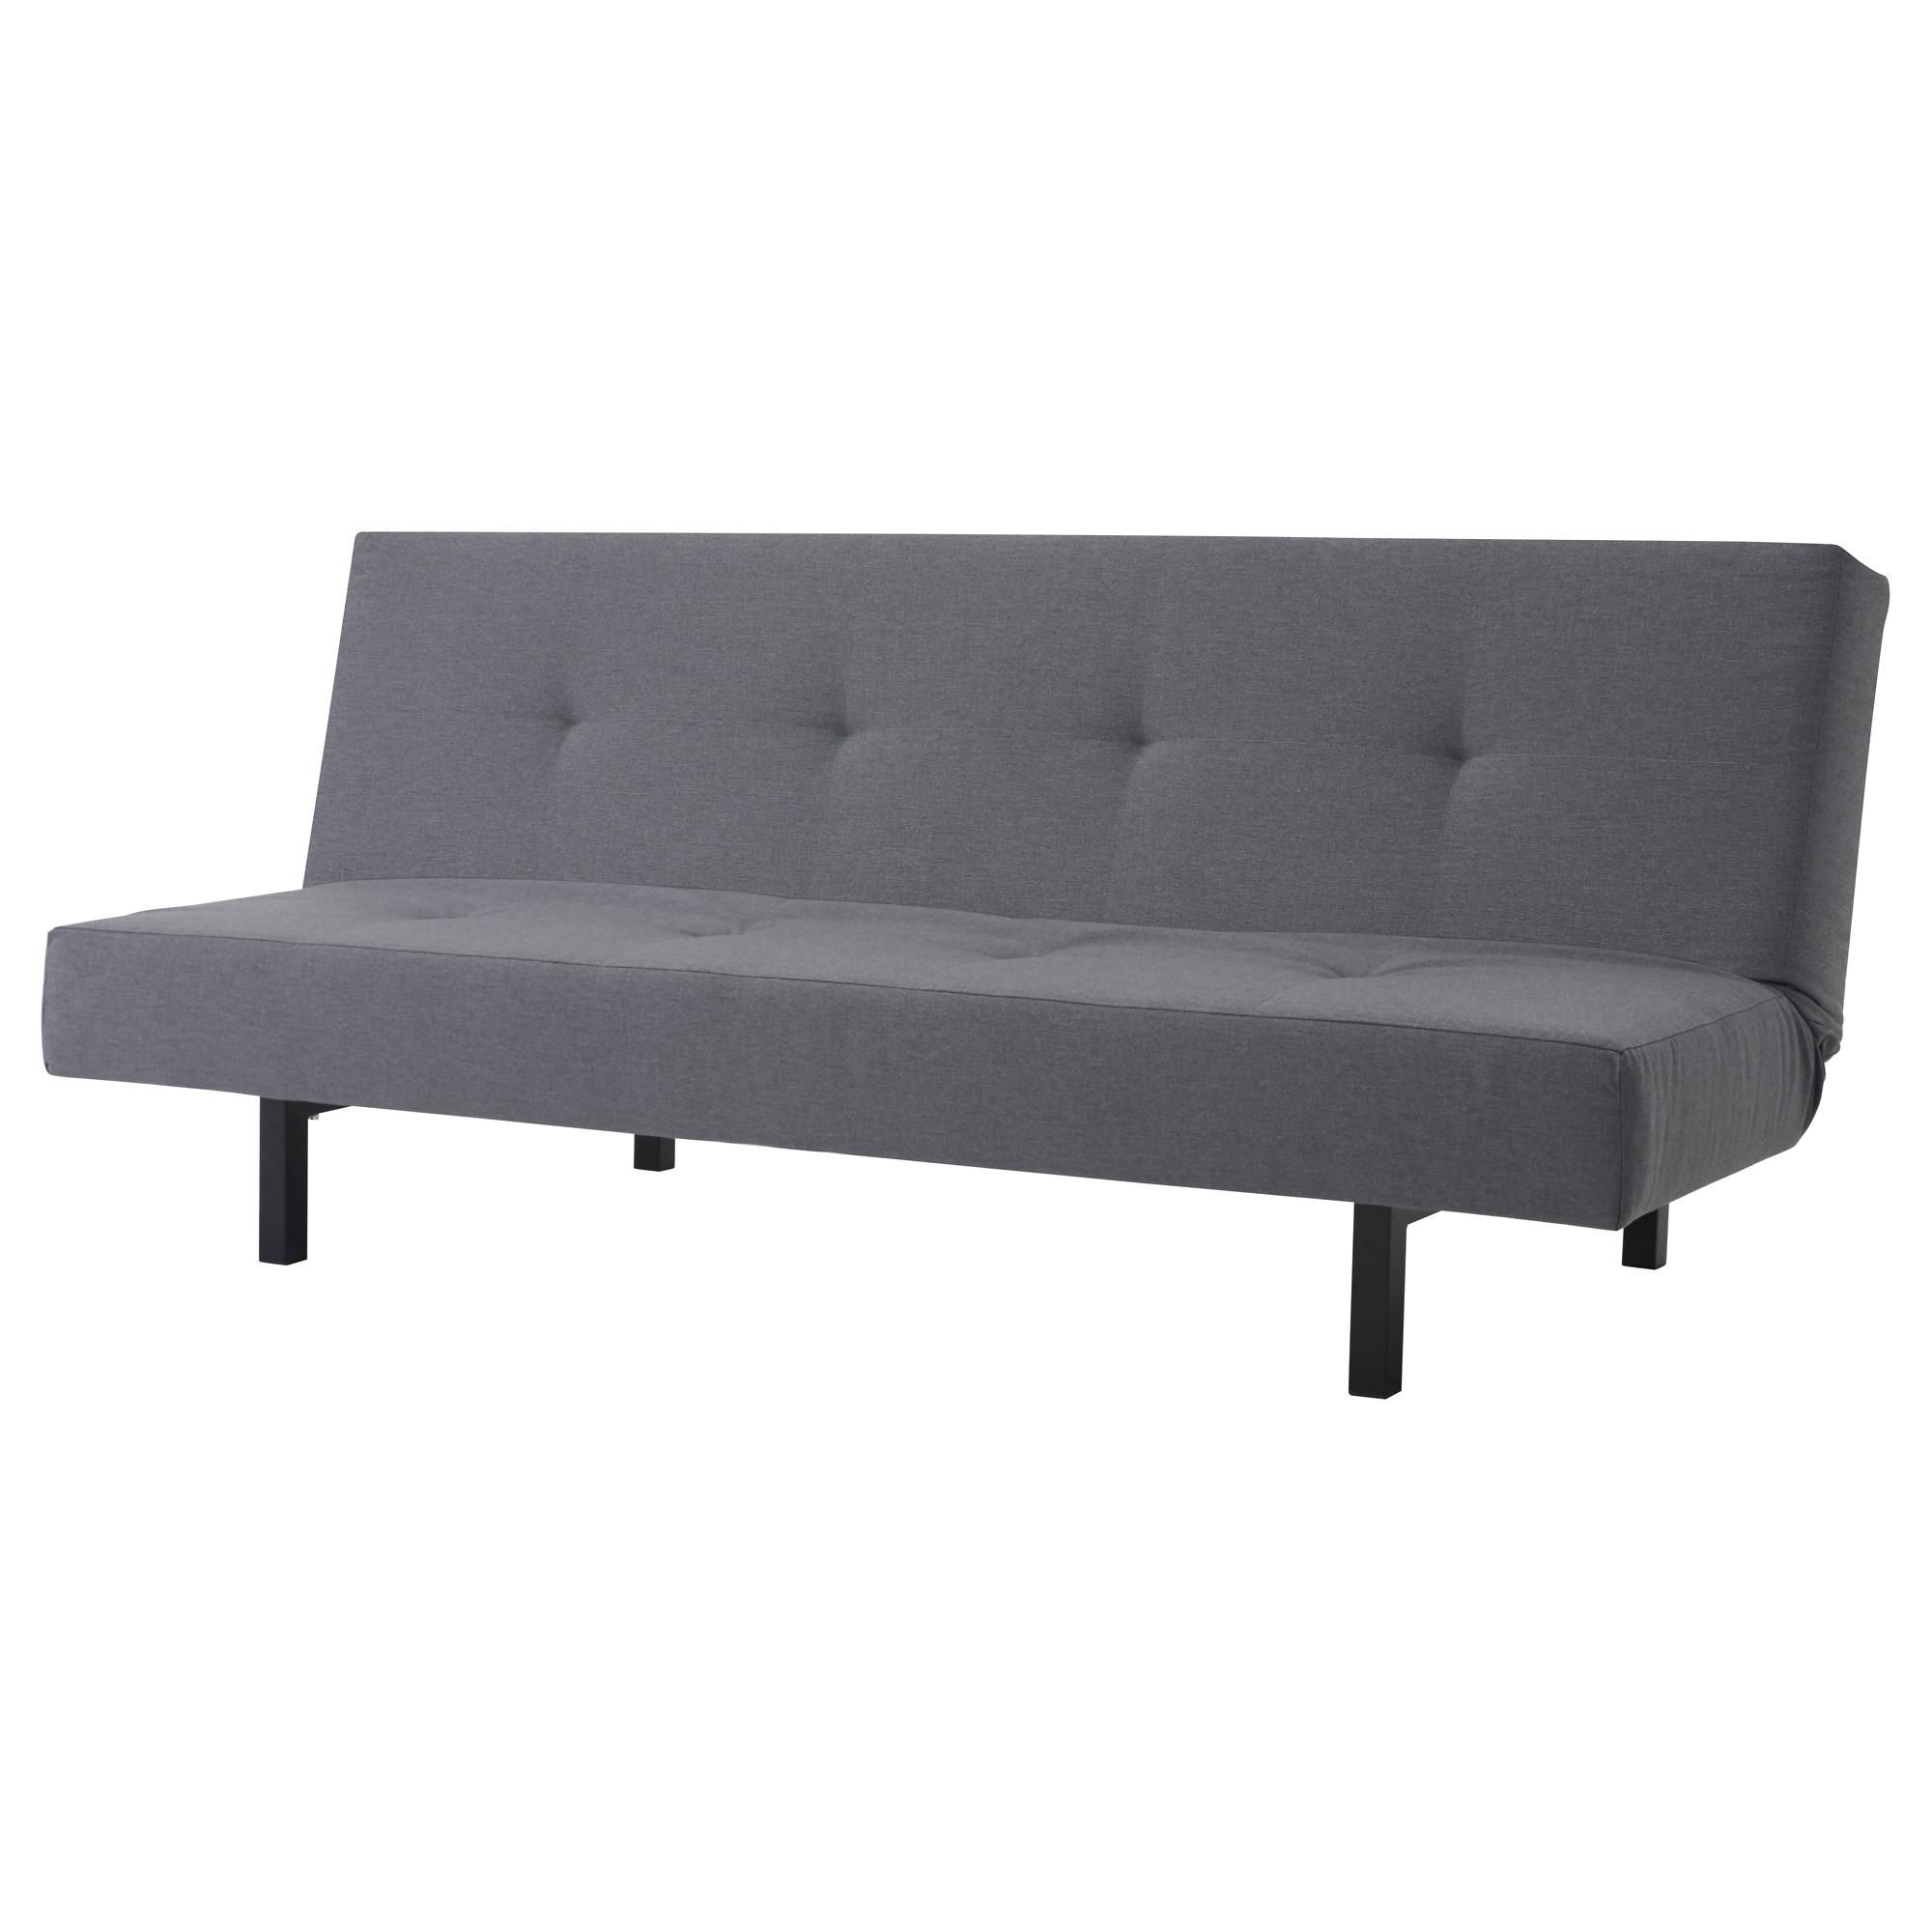 Sofa Beds & Futons – Ikea Intended For Ikea Single Sofa Beds (View 19 of 23)